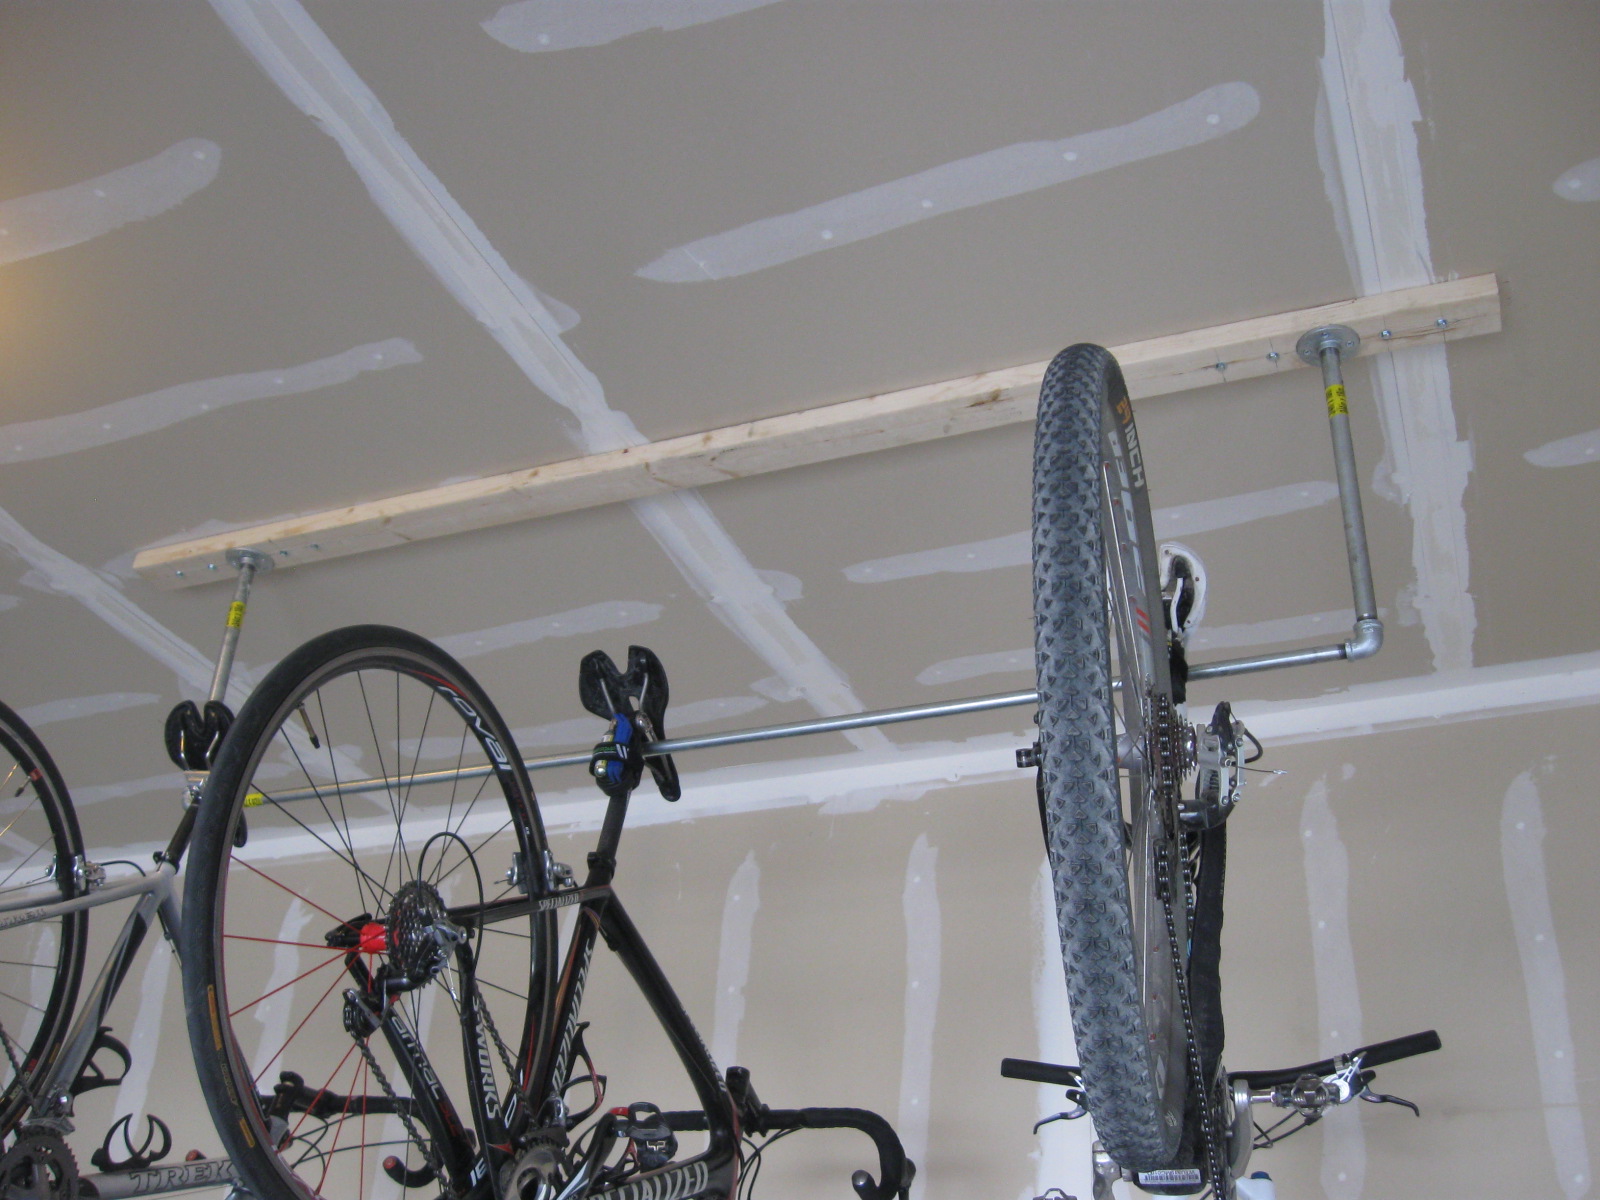 So little time, so much to explore: Garage Ceiling Bike Rack